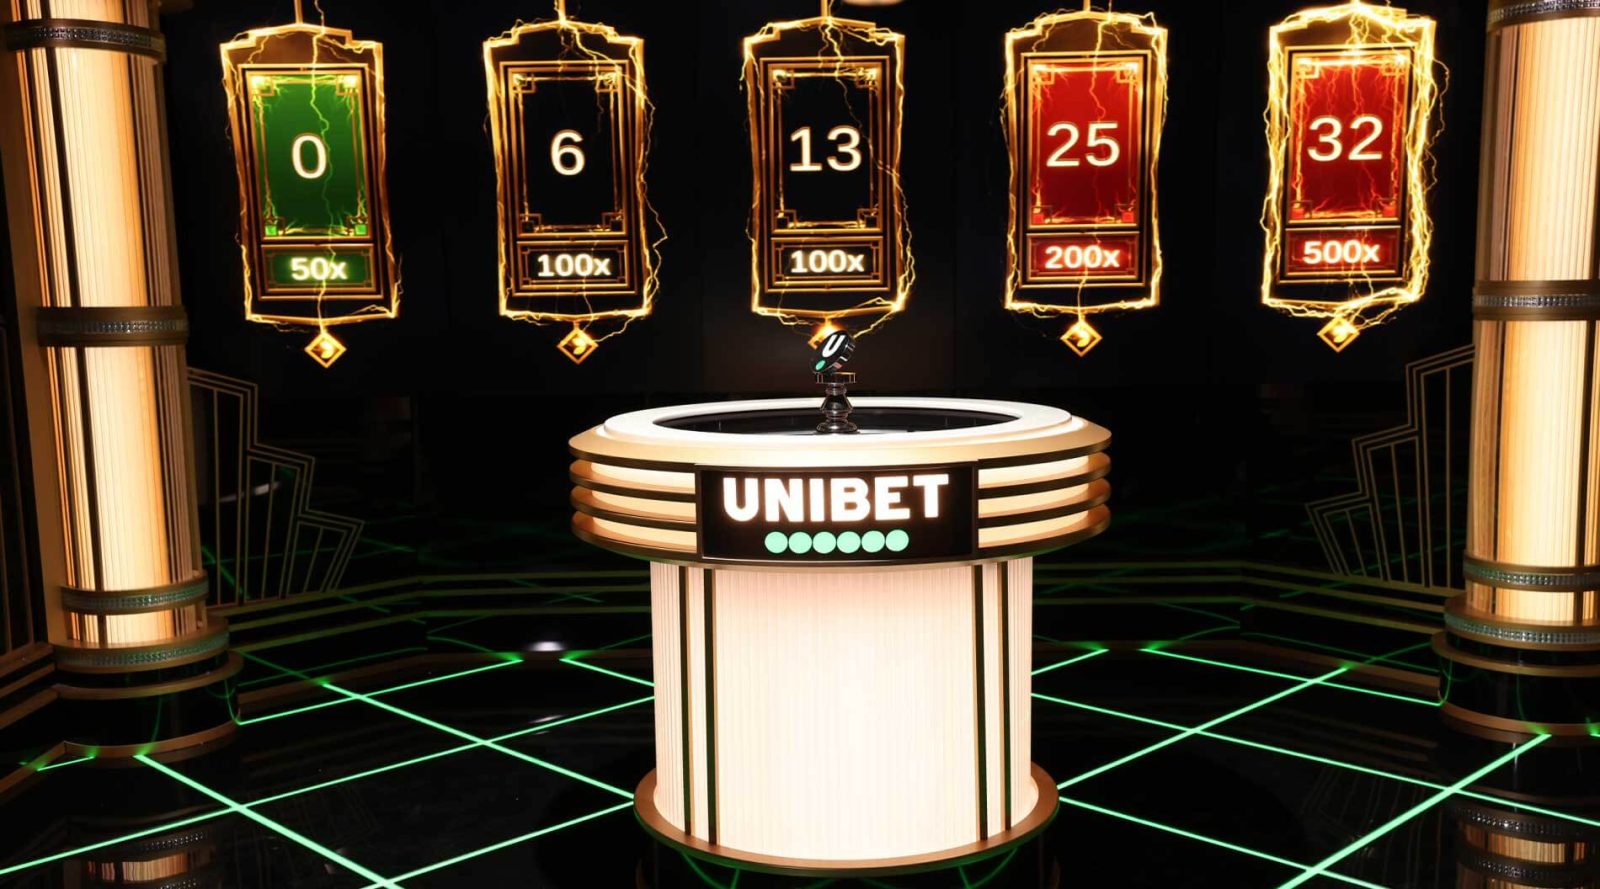 Unibet Deposits and Withdrawals